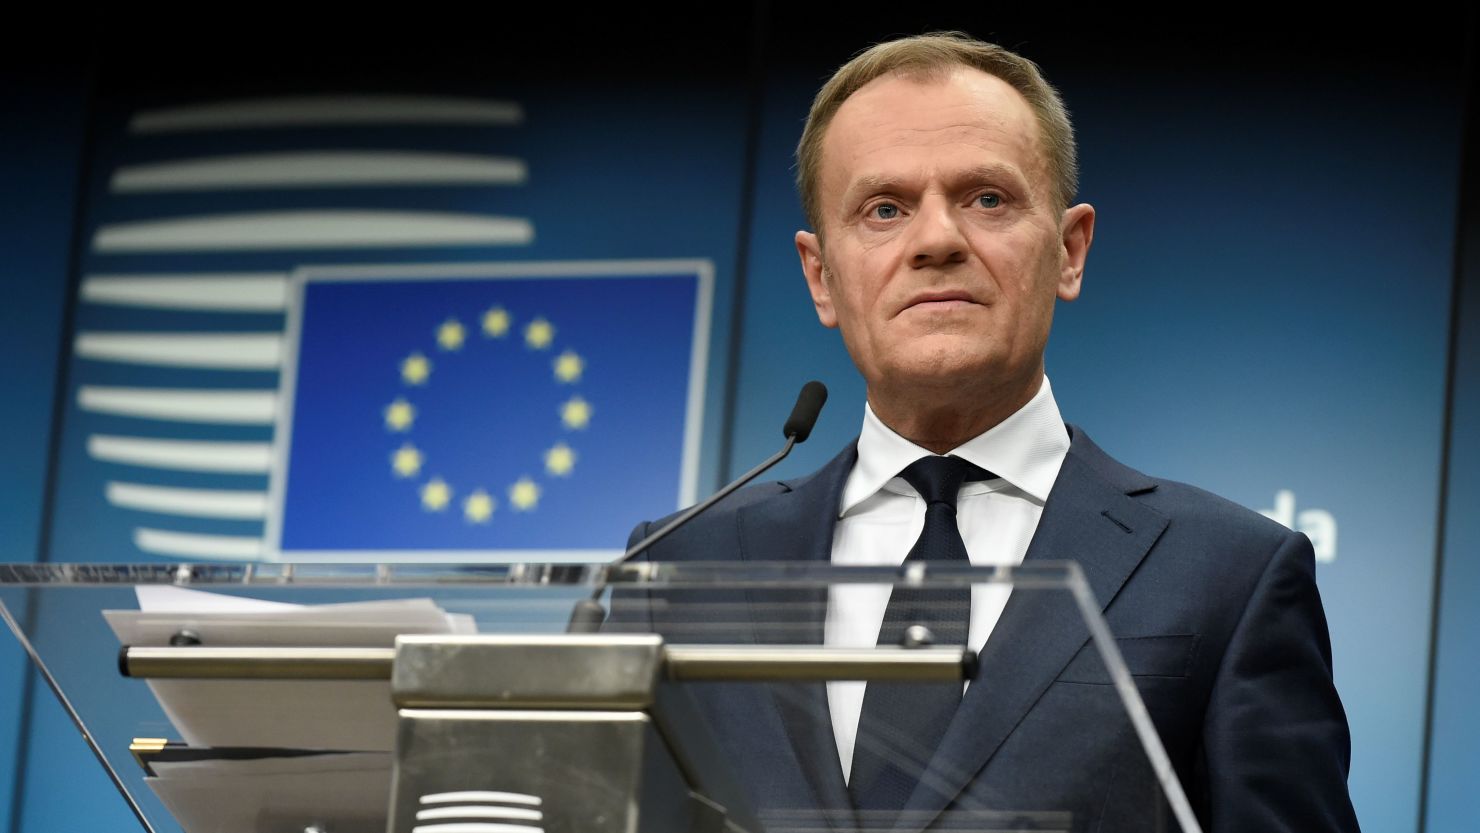 European Council Council Donald Tusk holds a joint press conference with the European Commission President on February 23, 2018. (JOHN THYS/AFP/Getty Images)